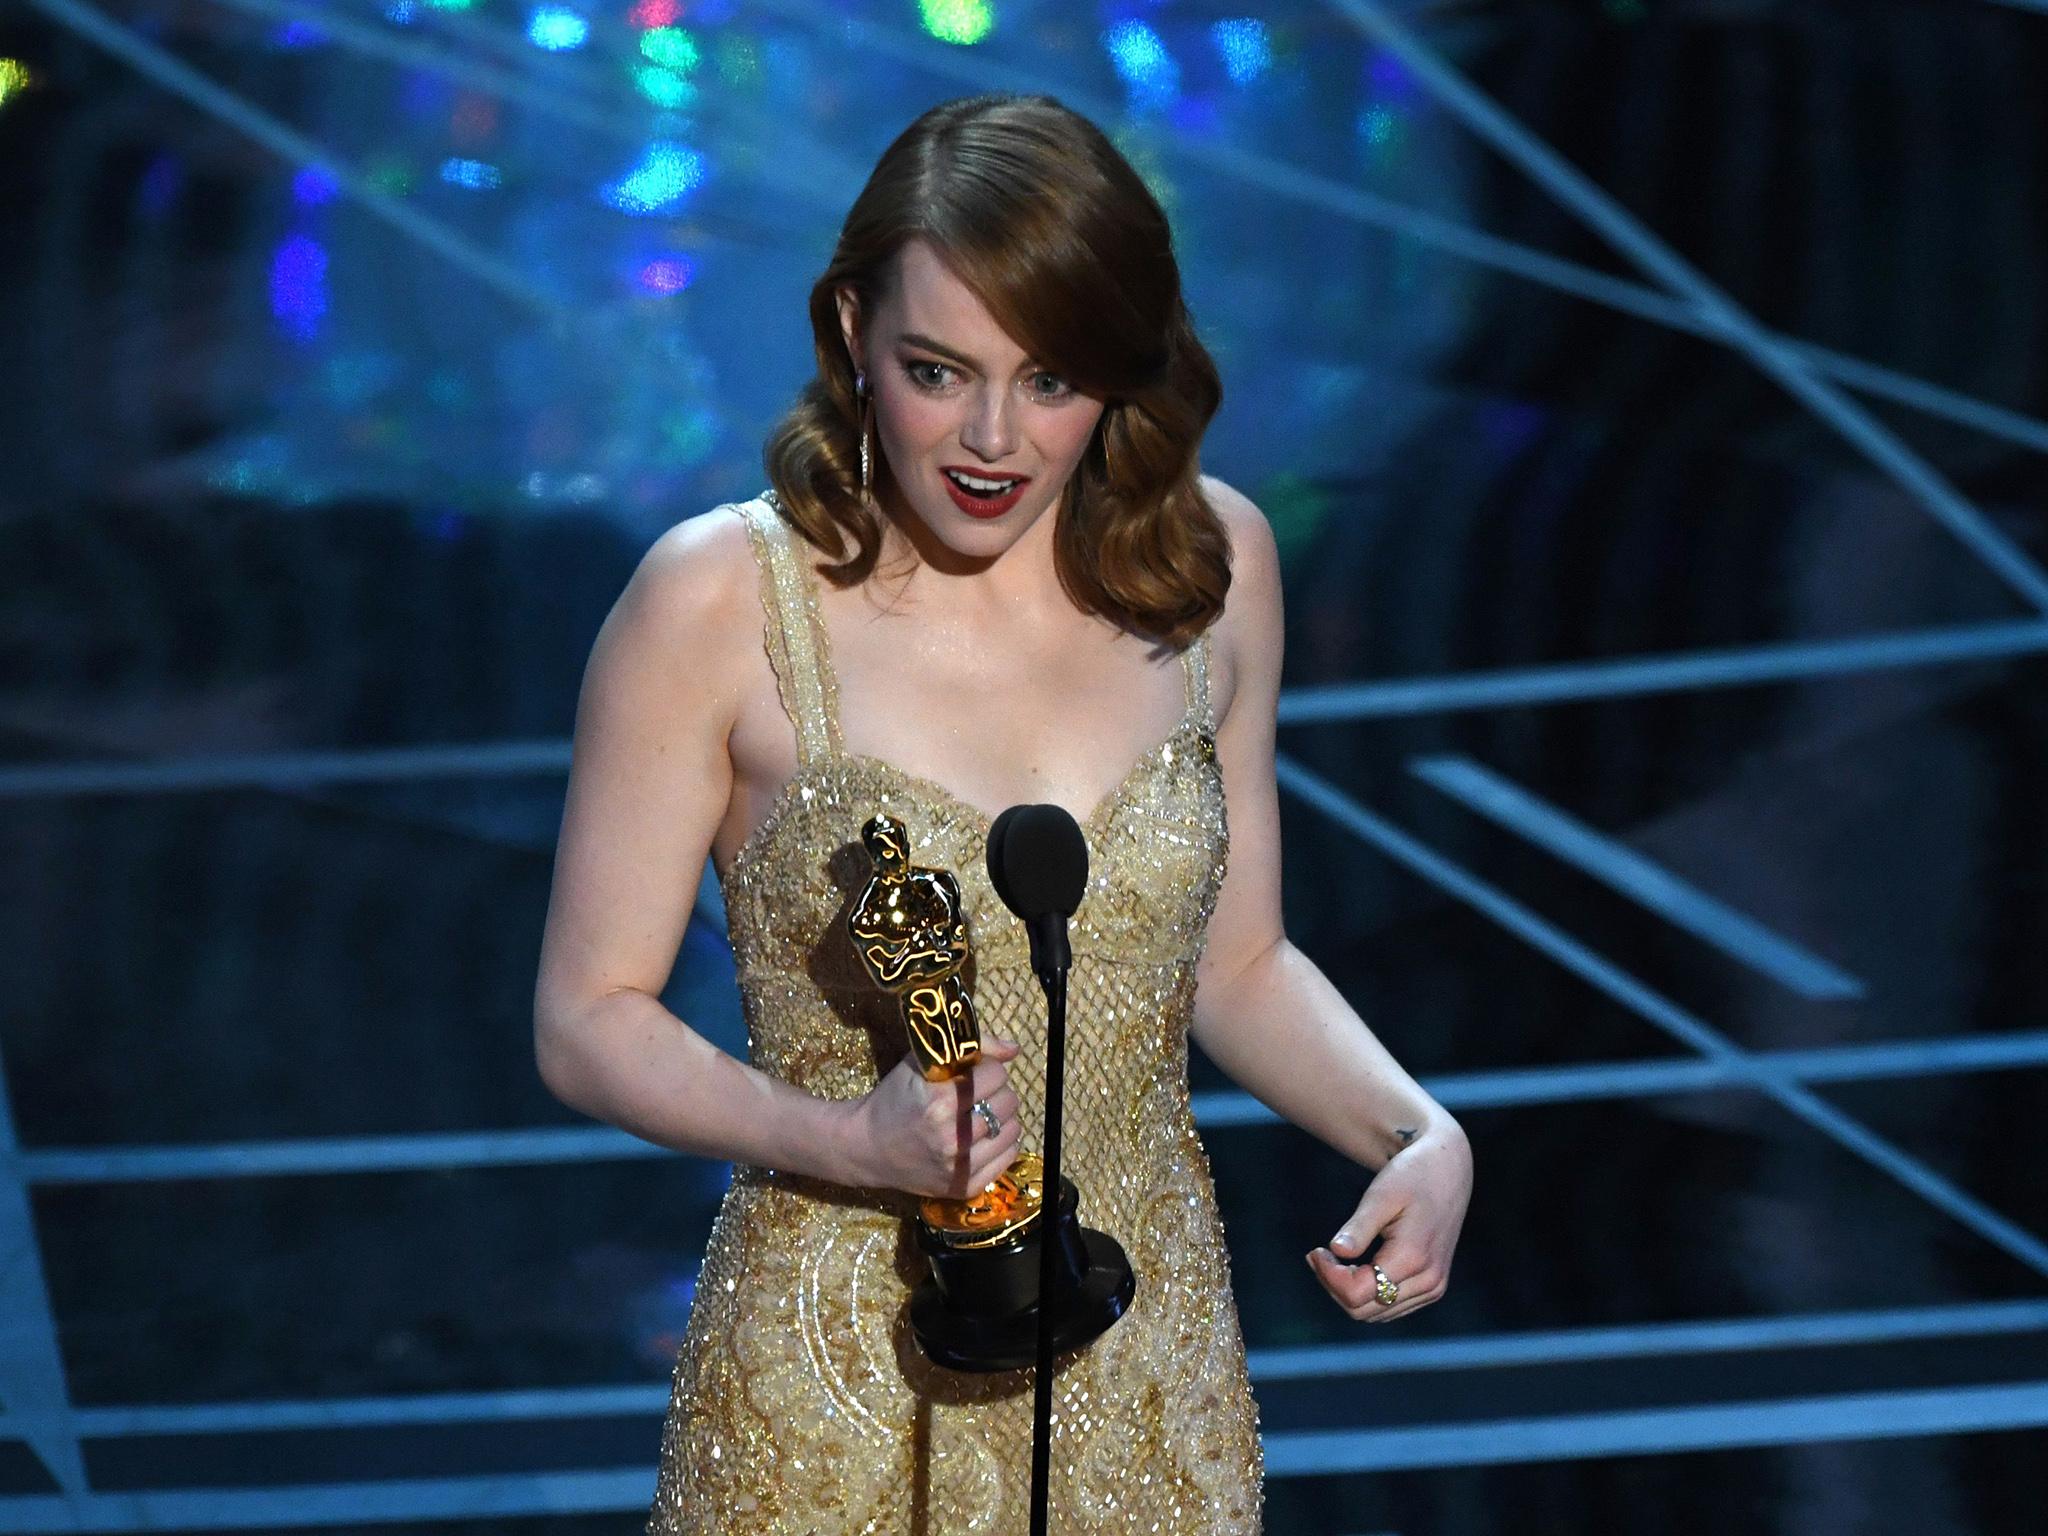 Oscars 2017: Emma Stone wins Best Actress for La La Land, The Independent